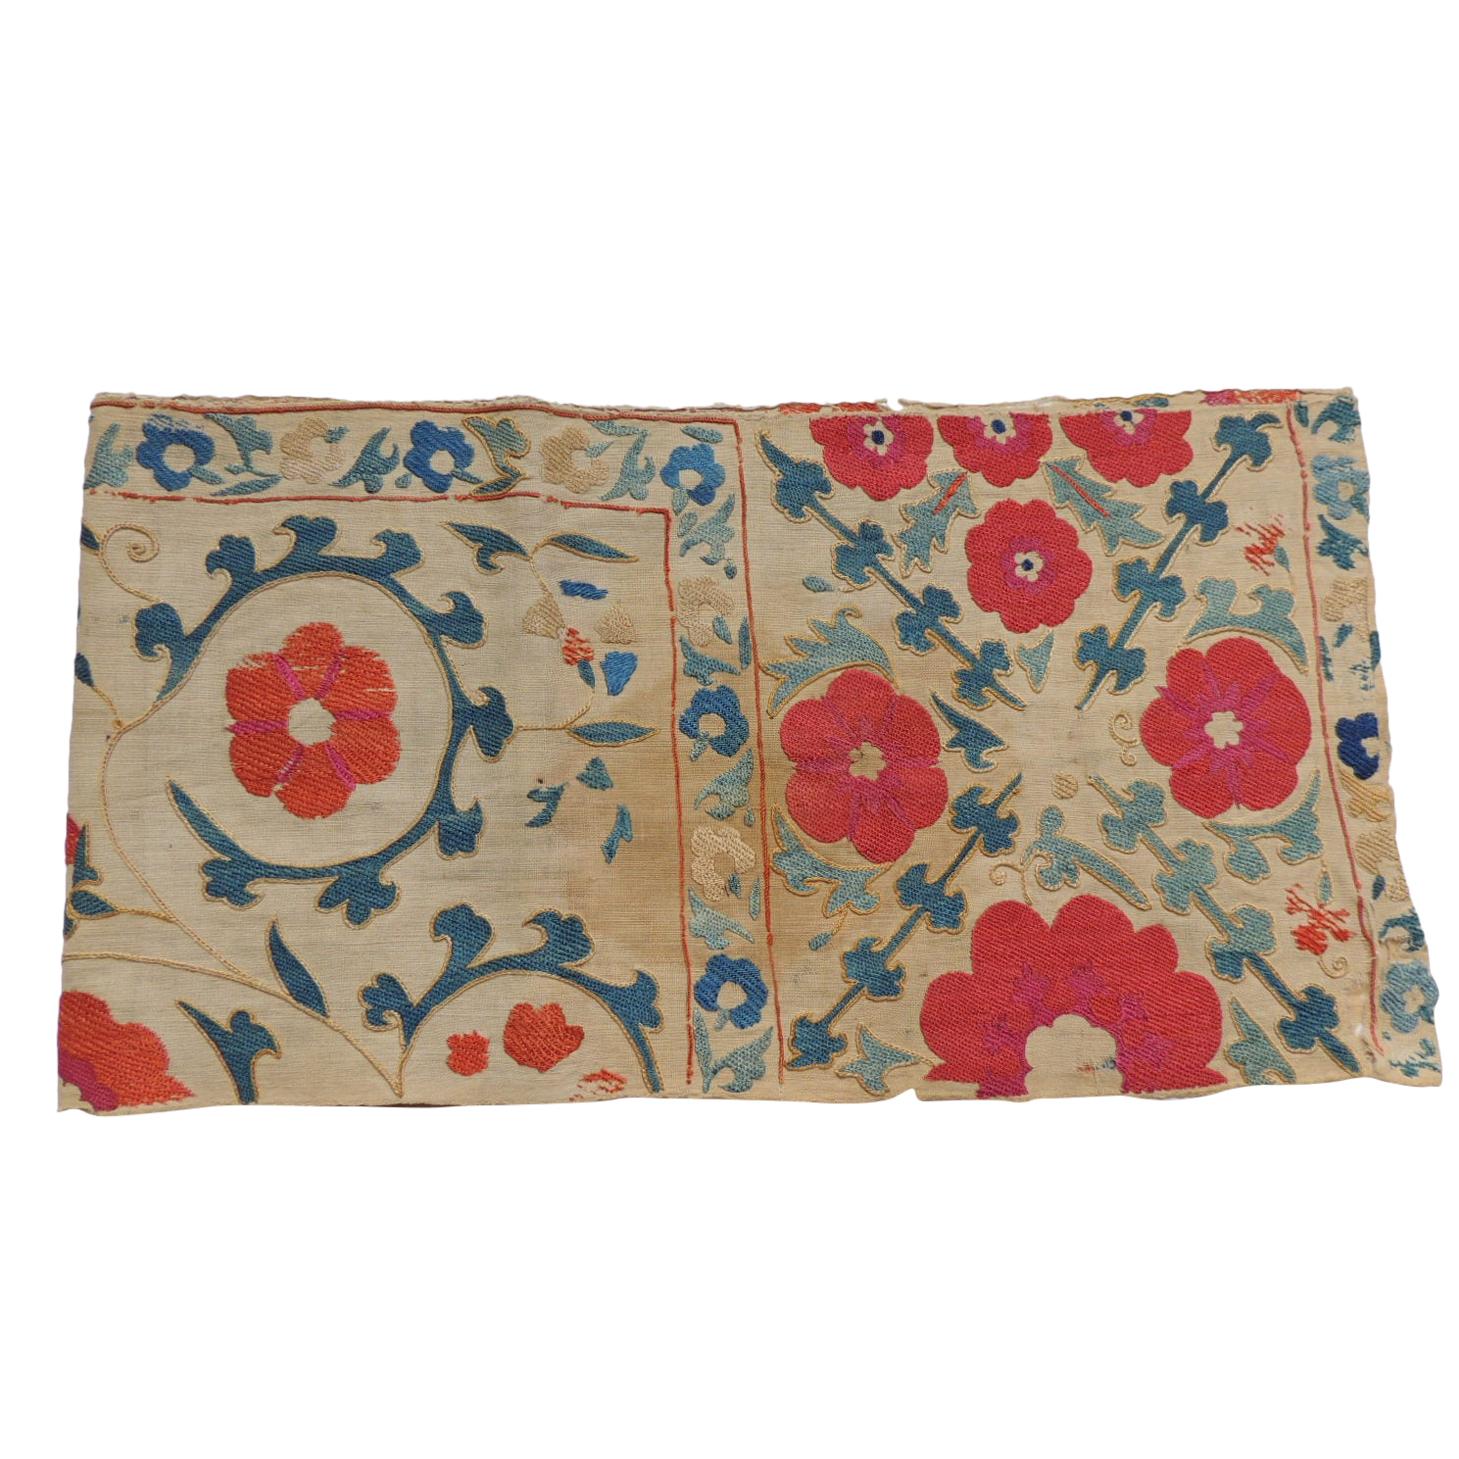 Antique Red and Green Floral Suzani Table Runner